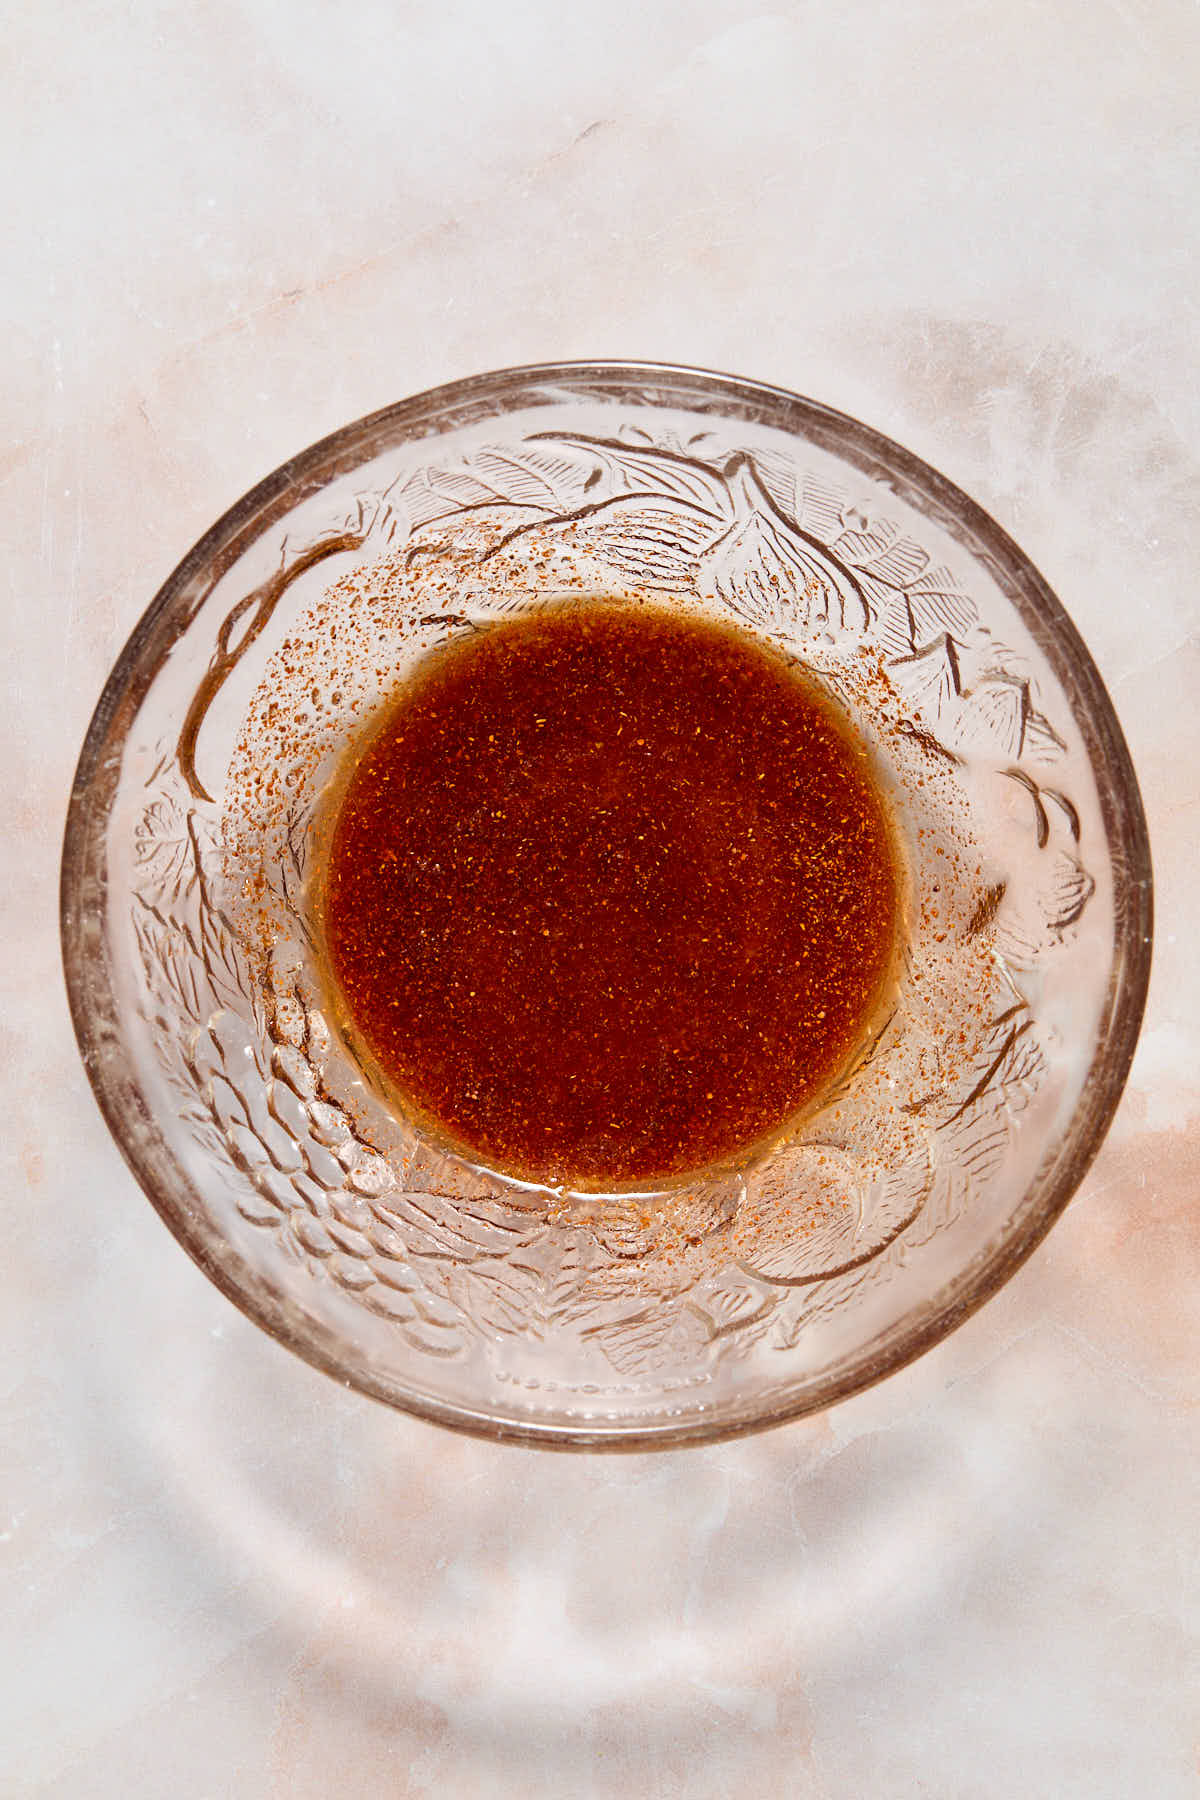 Oil and seasonings mixed together in a small glass bowl.